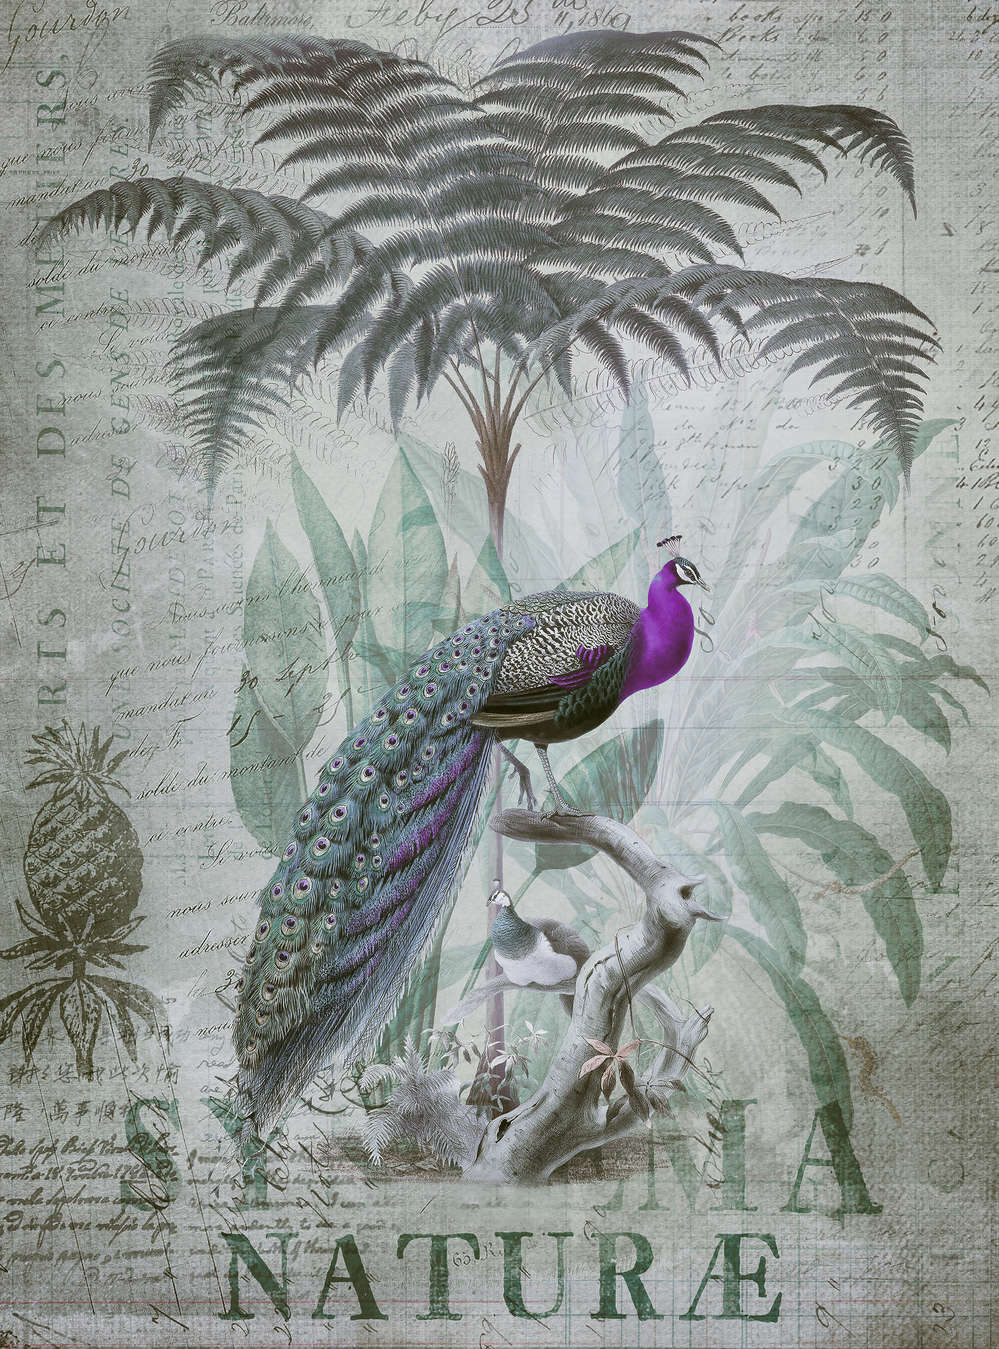             Vintage mural purple peacock with tropical plants & writing
        